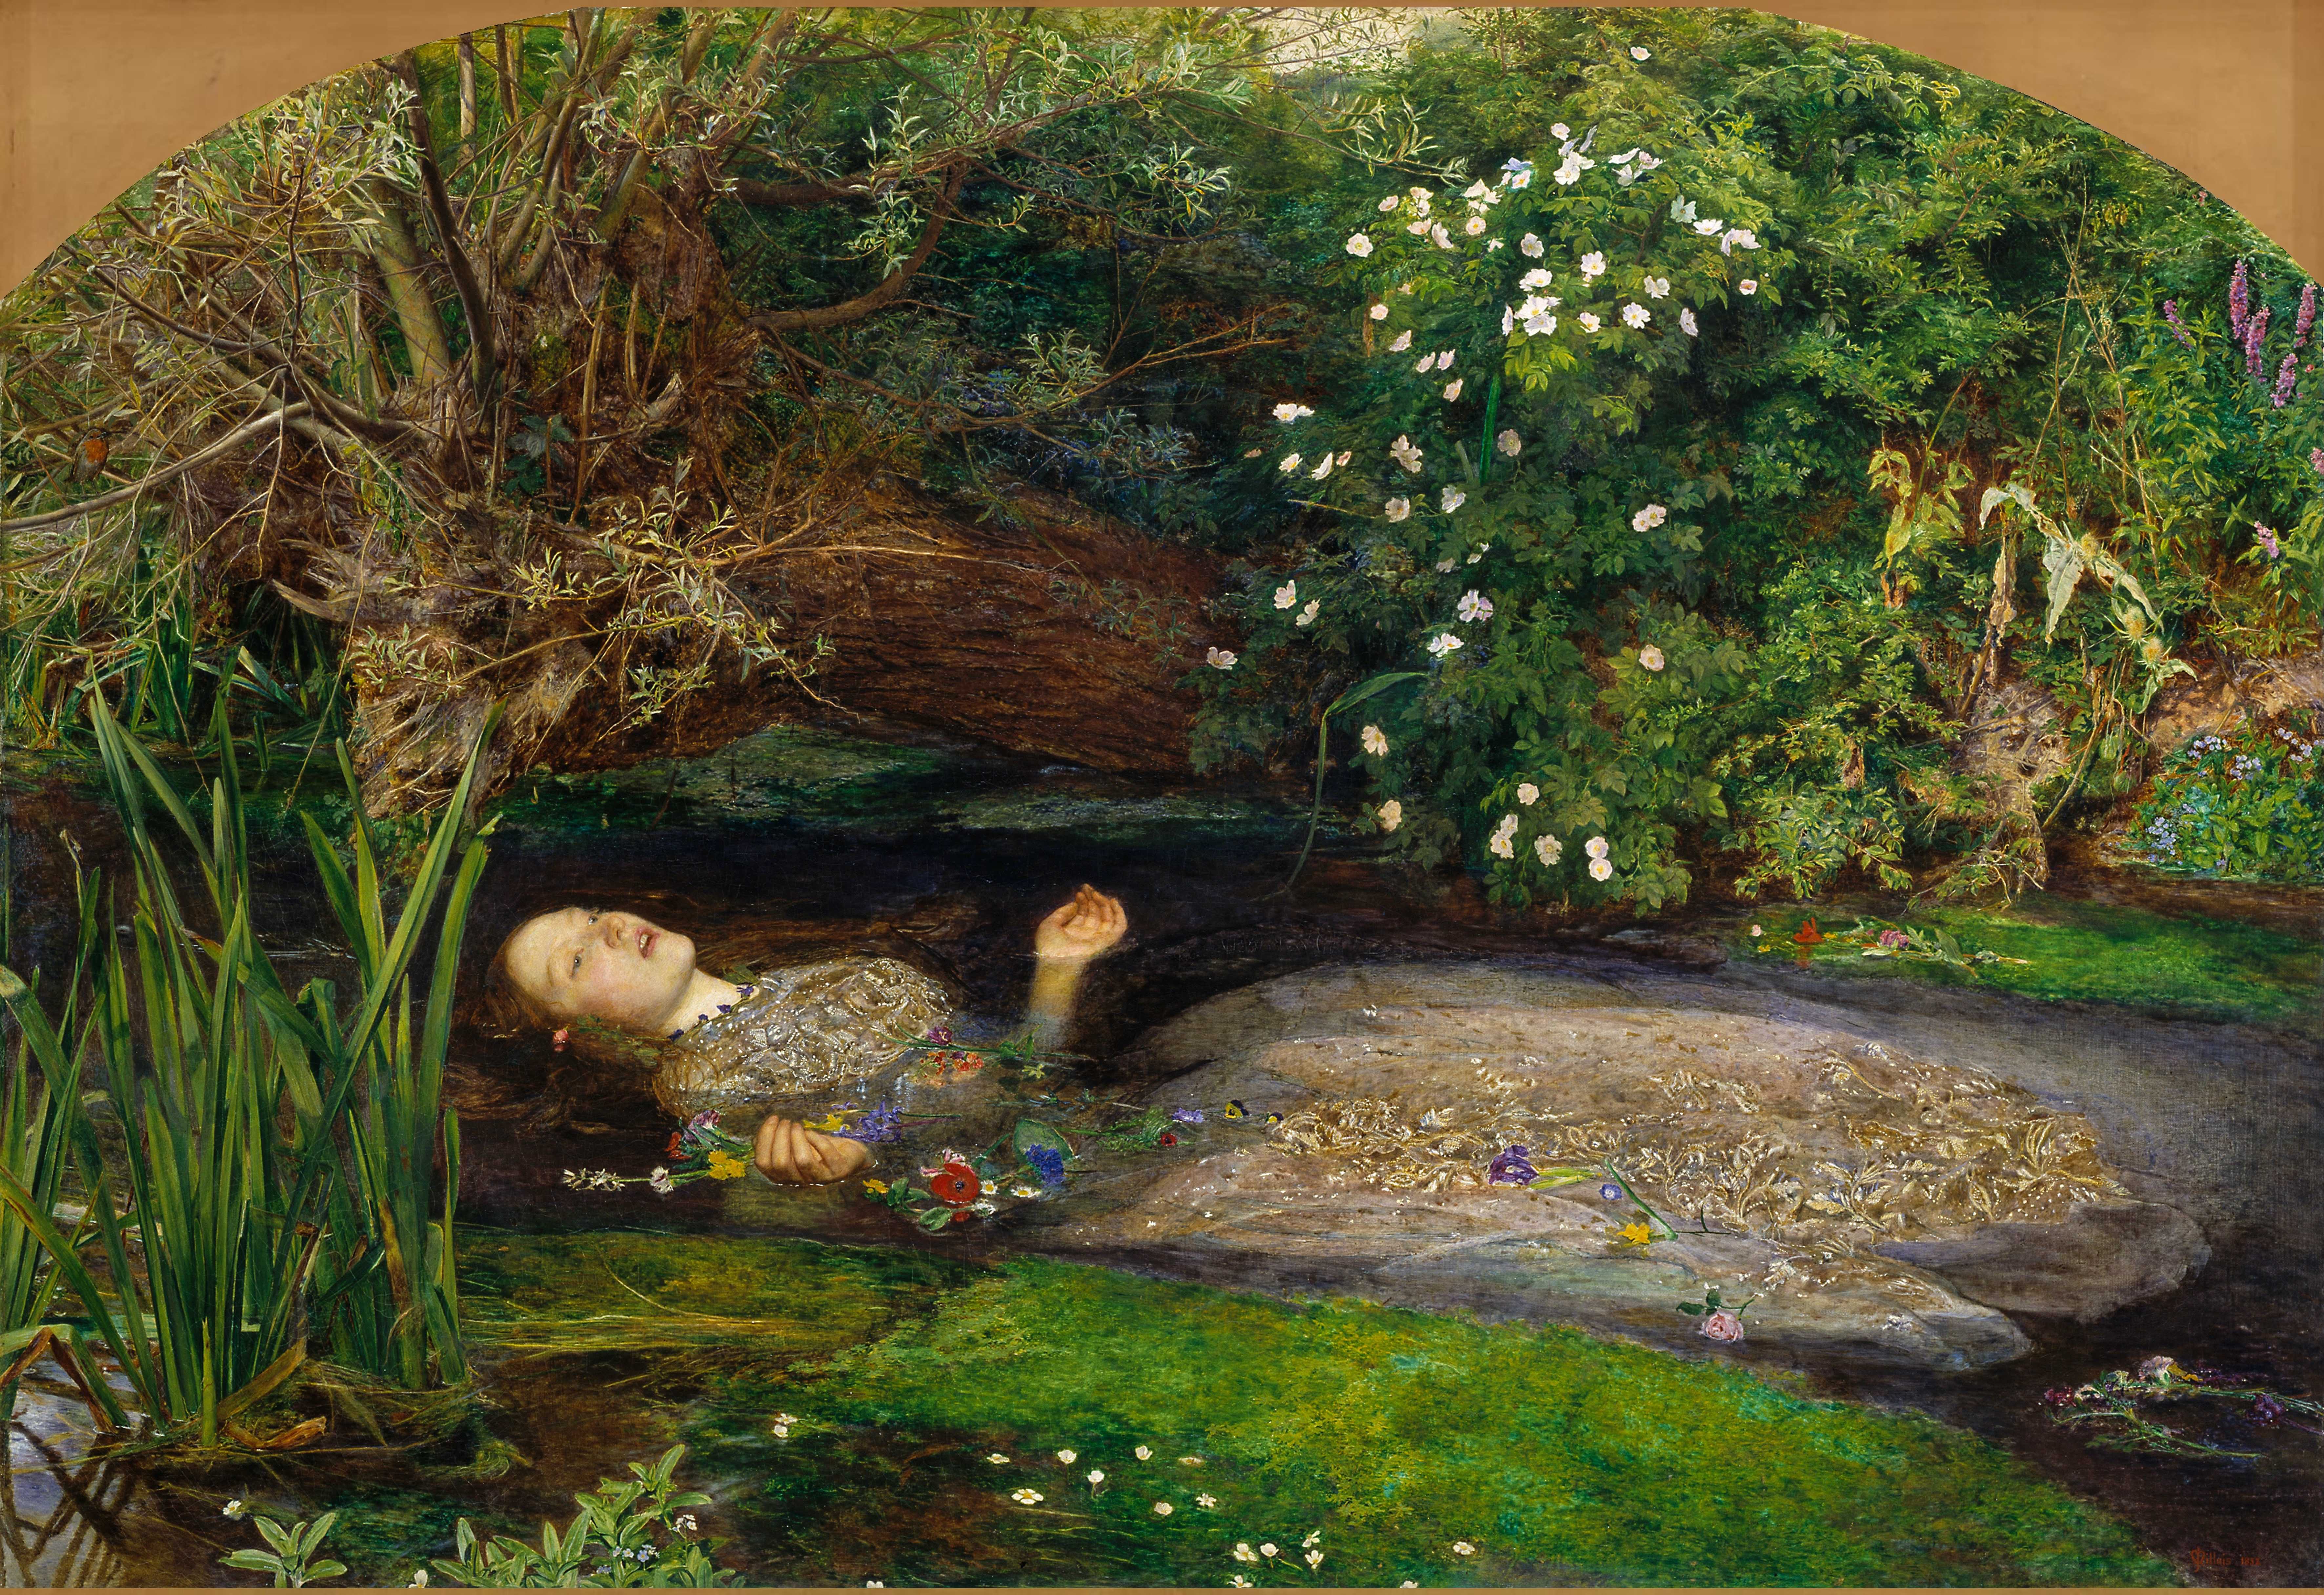 Find out more about Sir John Everett Millais - Ophelia